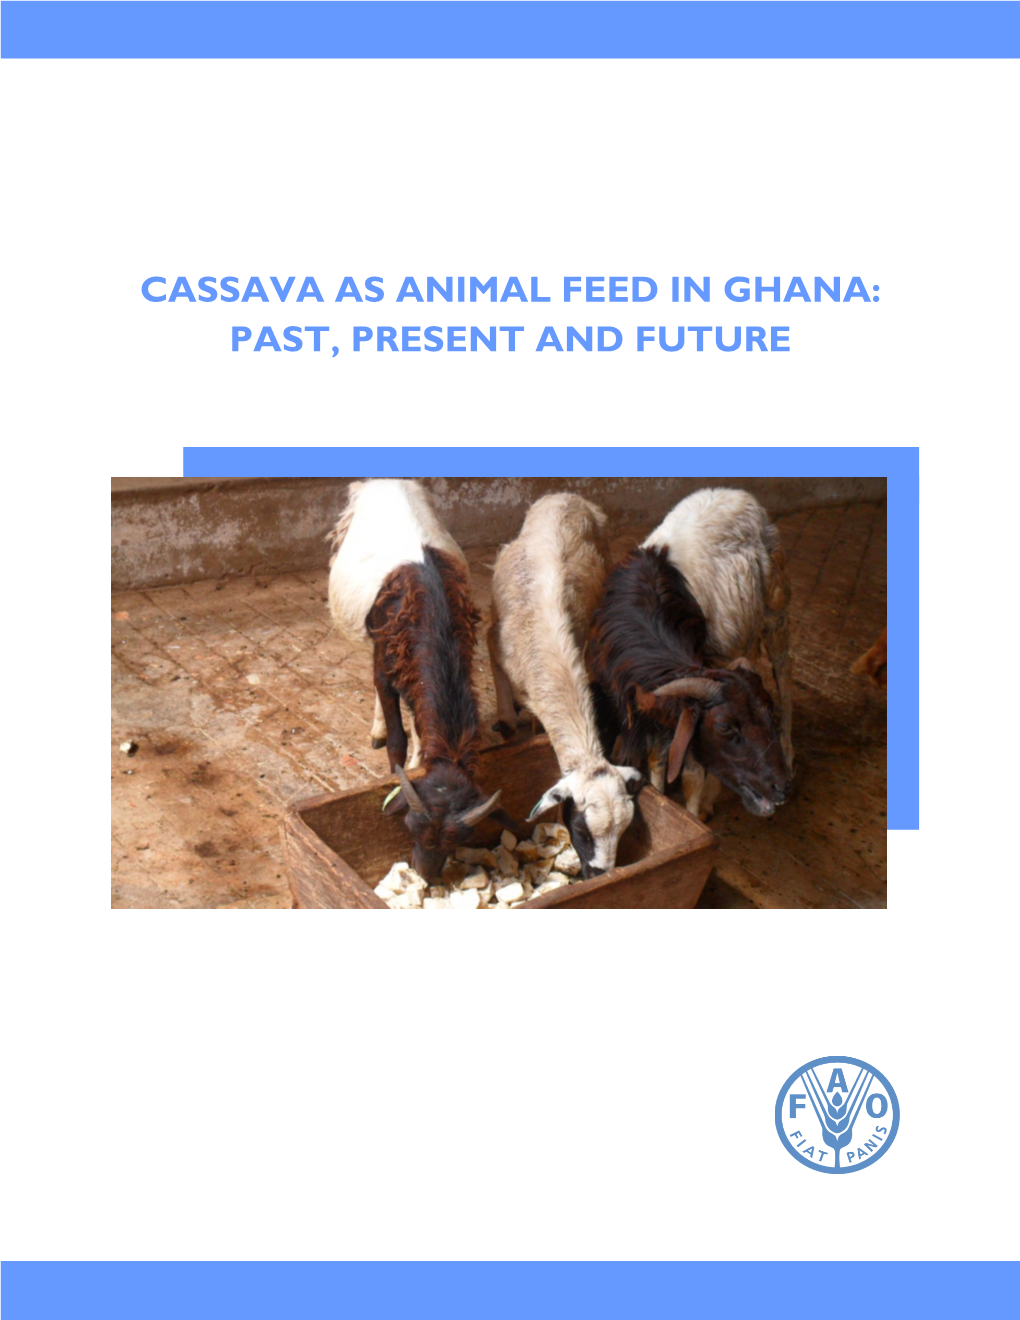 Cassava As Animal Feed in Ghana: Past, Present and Future